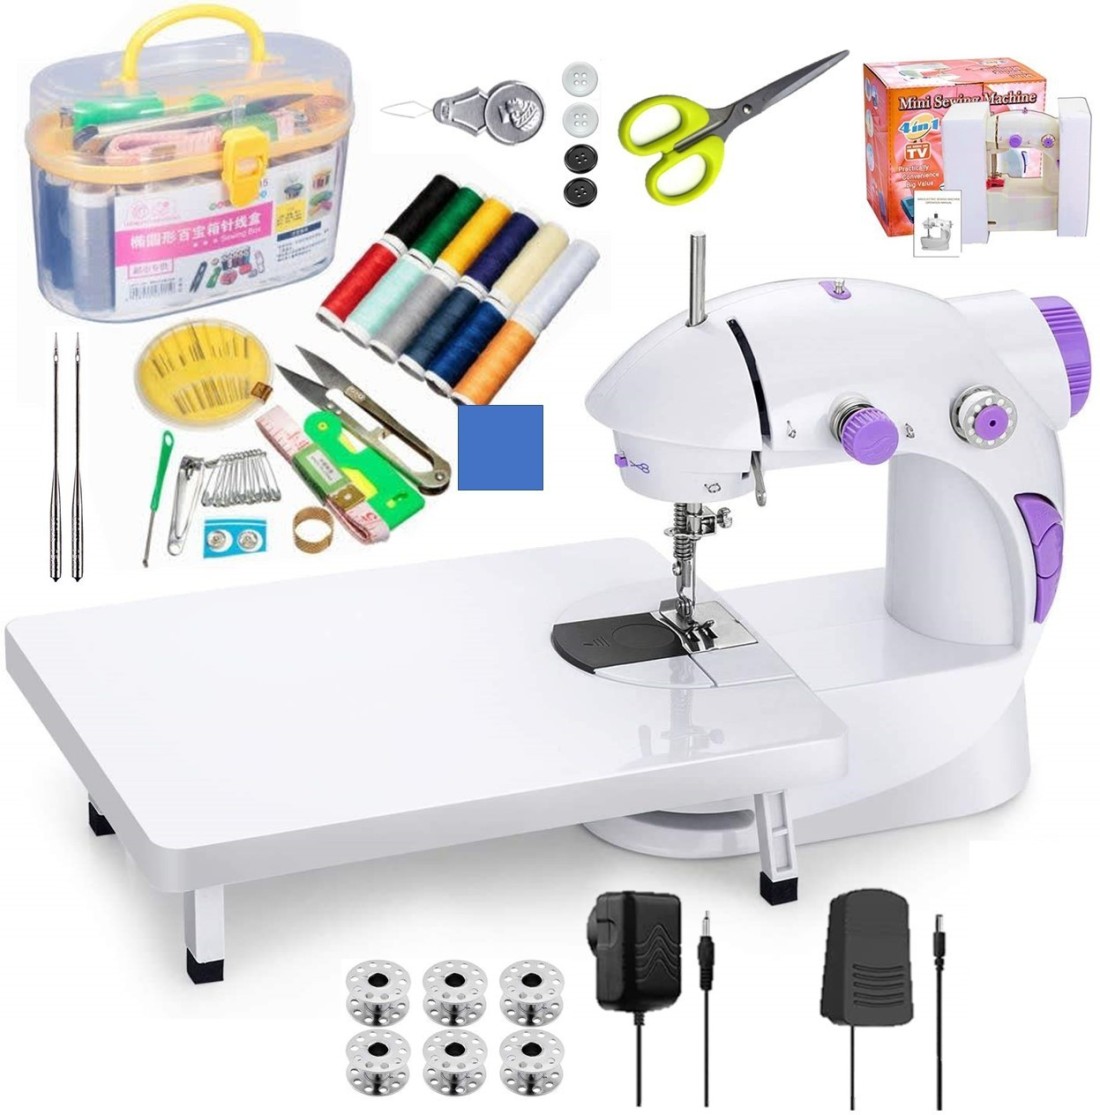 Kiwilon Sewing Machine for Home Use with Extension Table Foot Pedal,  Adapter and Sewing Kit, Threas, bobbins, Thread Cutter, Ripper, Press  Button, Hand Sewing Needle Sewing Kit Price in India - Buy